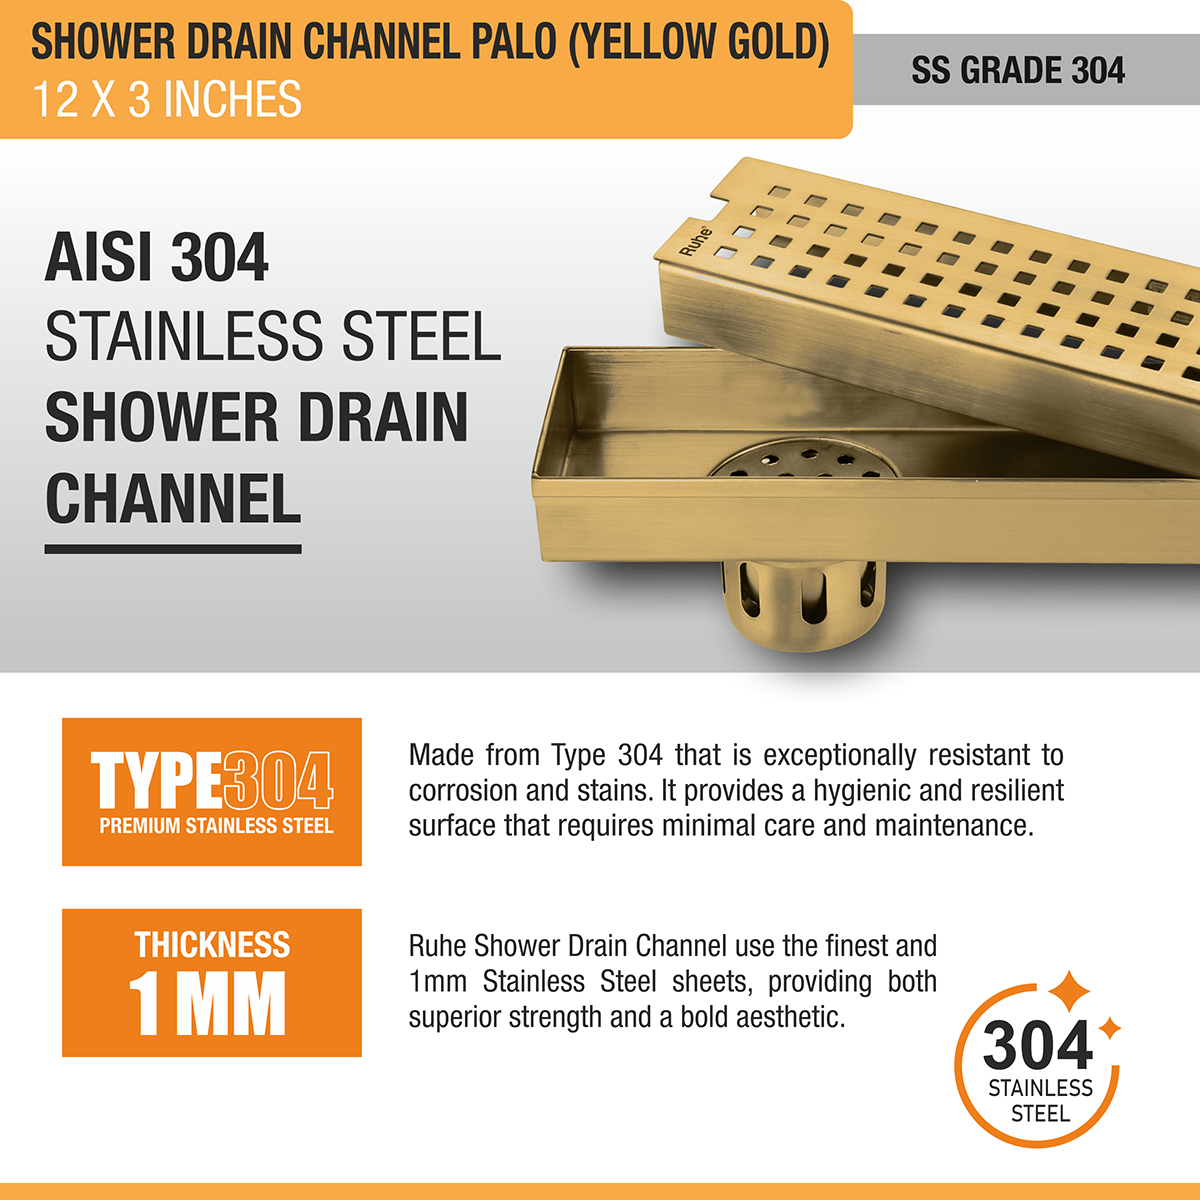 Palo Shower Drain Channel (12 x 3 Inches) YELLOW GOLD stainless steel